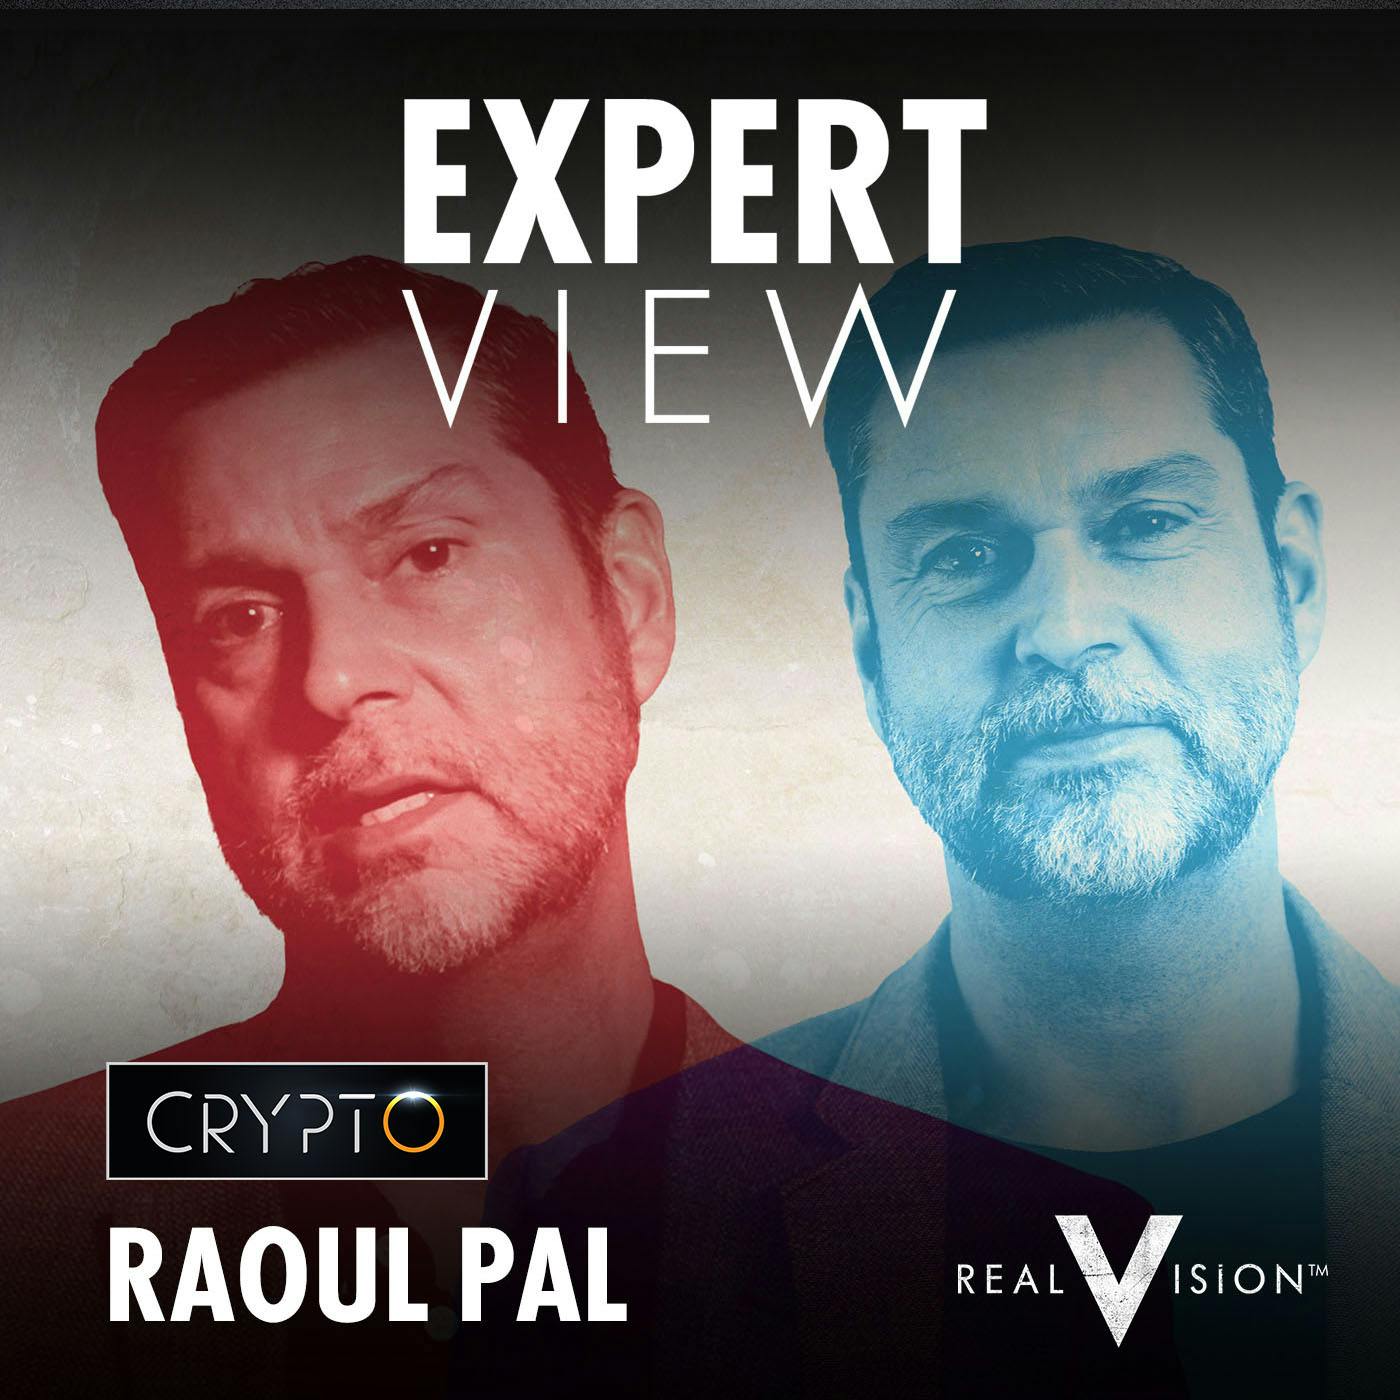 The Bitcoin Life Raft: The End of Monetary & Fiscal Policy As We Know It w/ Raoul Pal